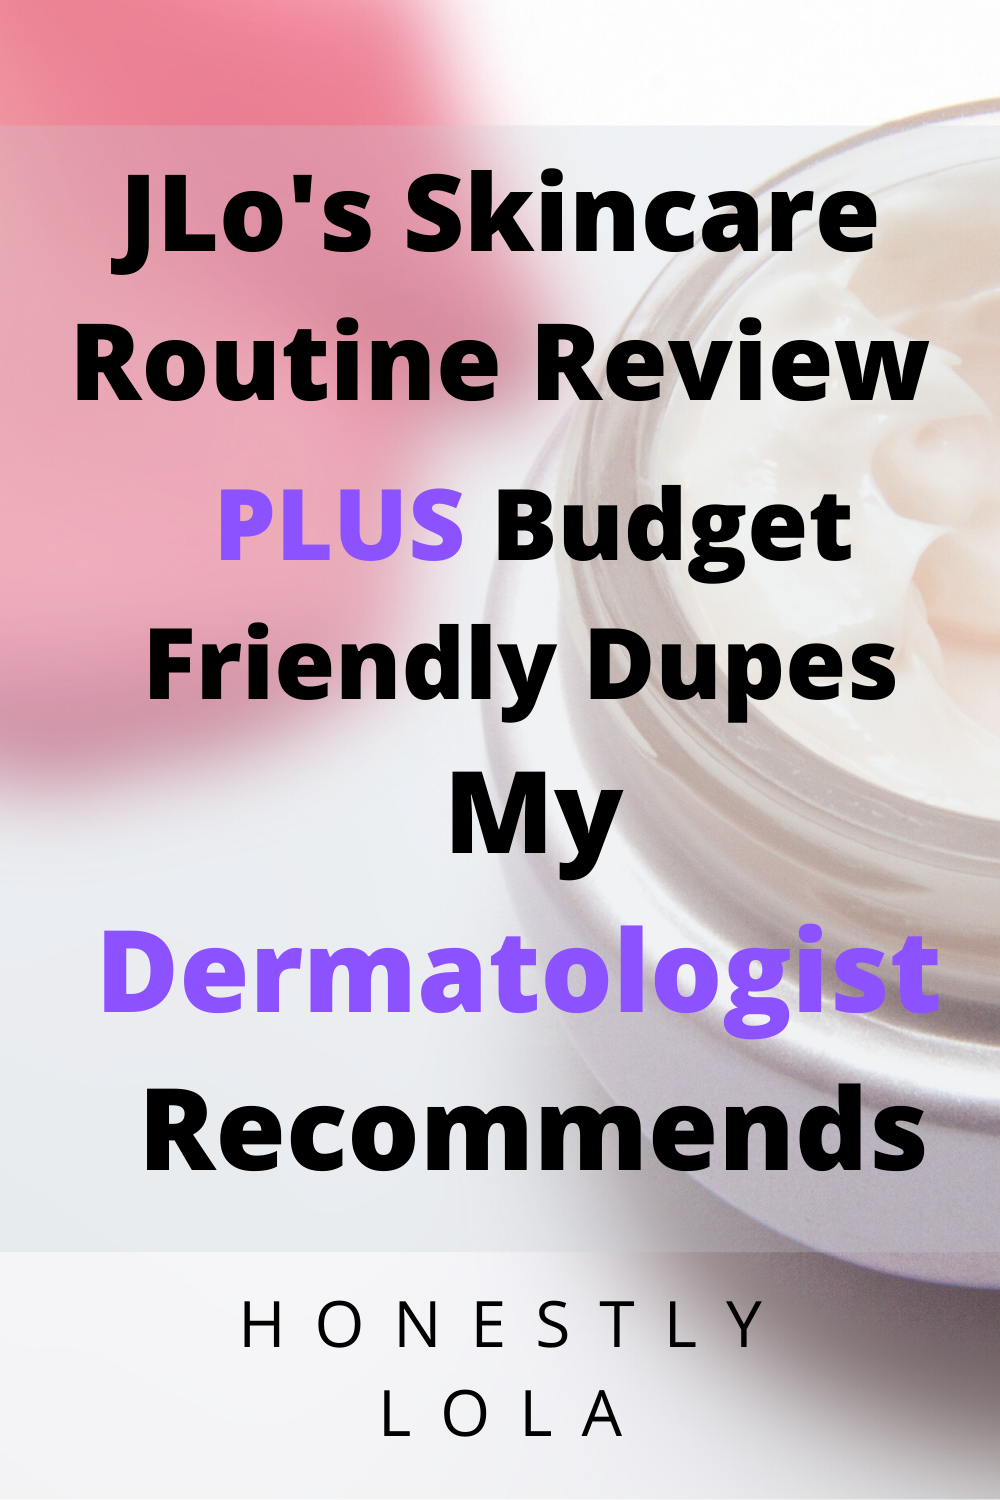 JLo's Skin Care Review Plus Budget Friendly Dupes -   19 skin care Dupes budget ideas